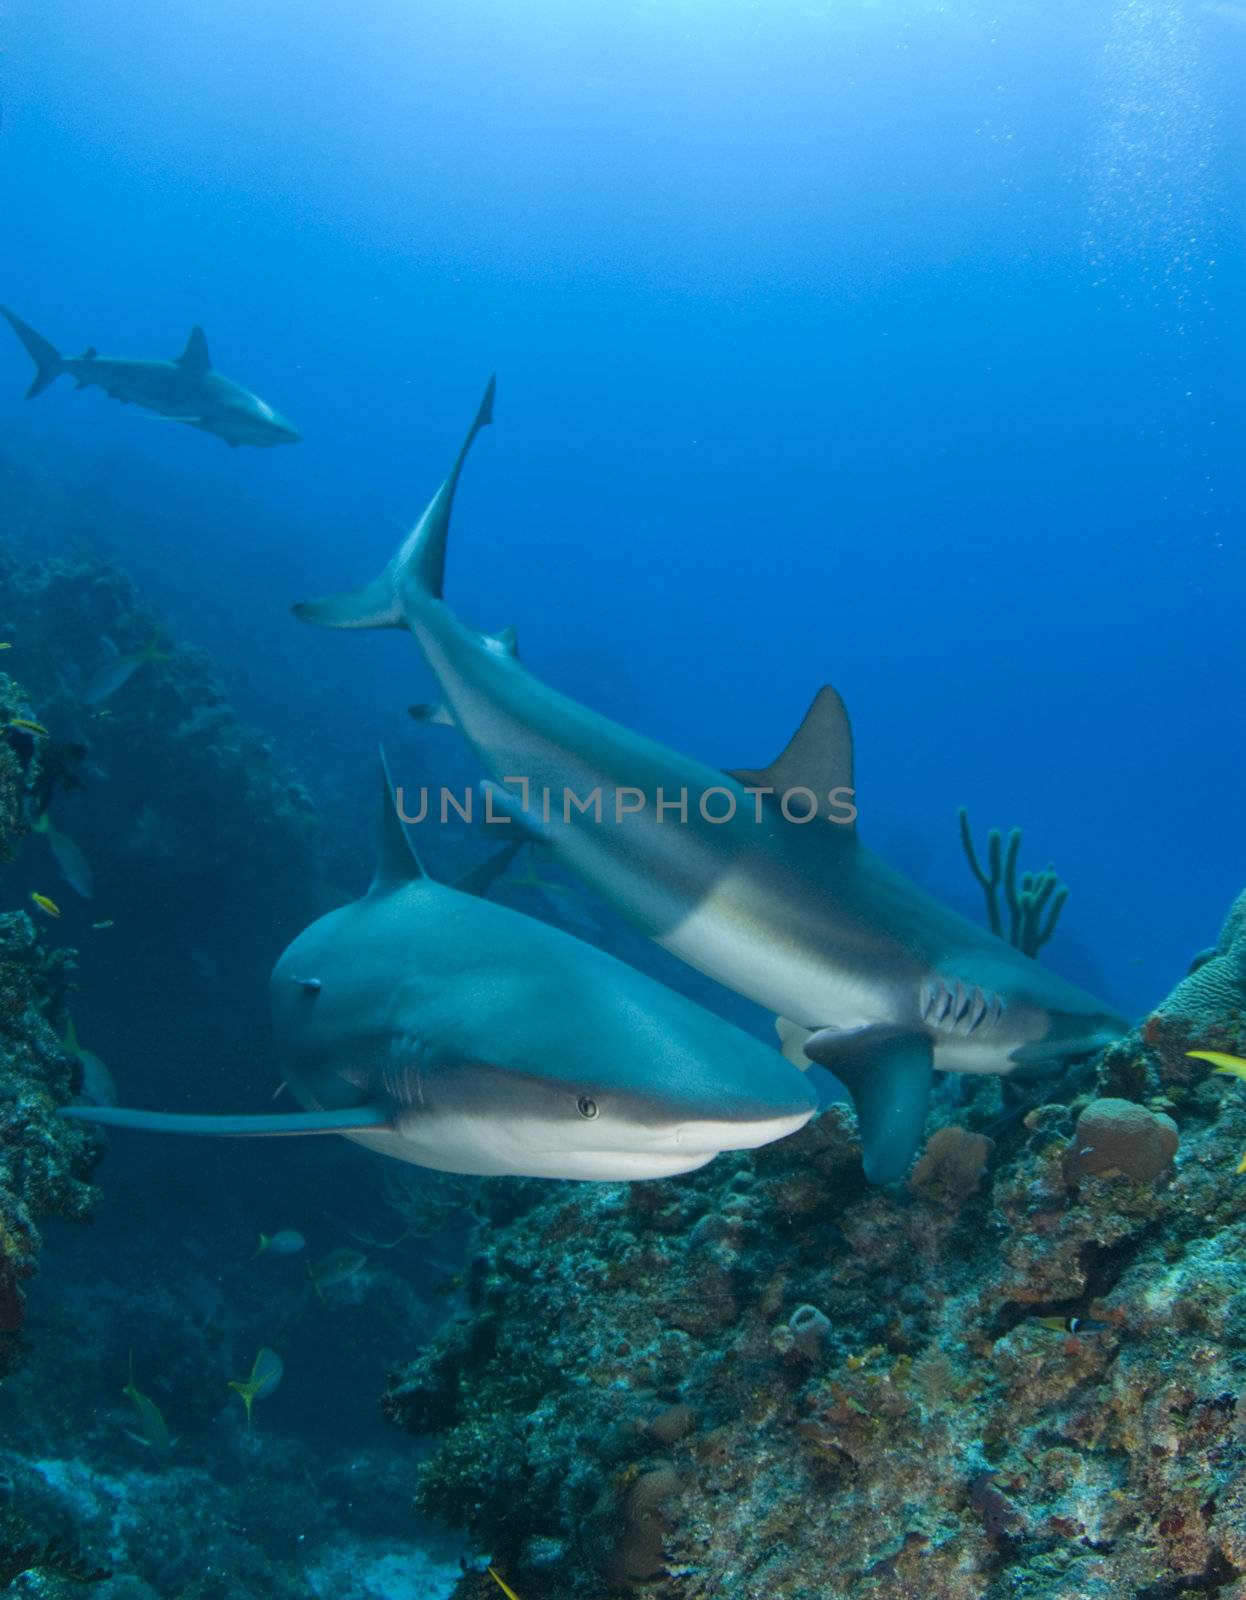 Caribbean Reef Sharks swim and eat fish above the reef at Murials Garden, a dive site located off Grand Bahama.